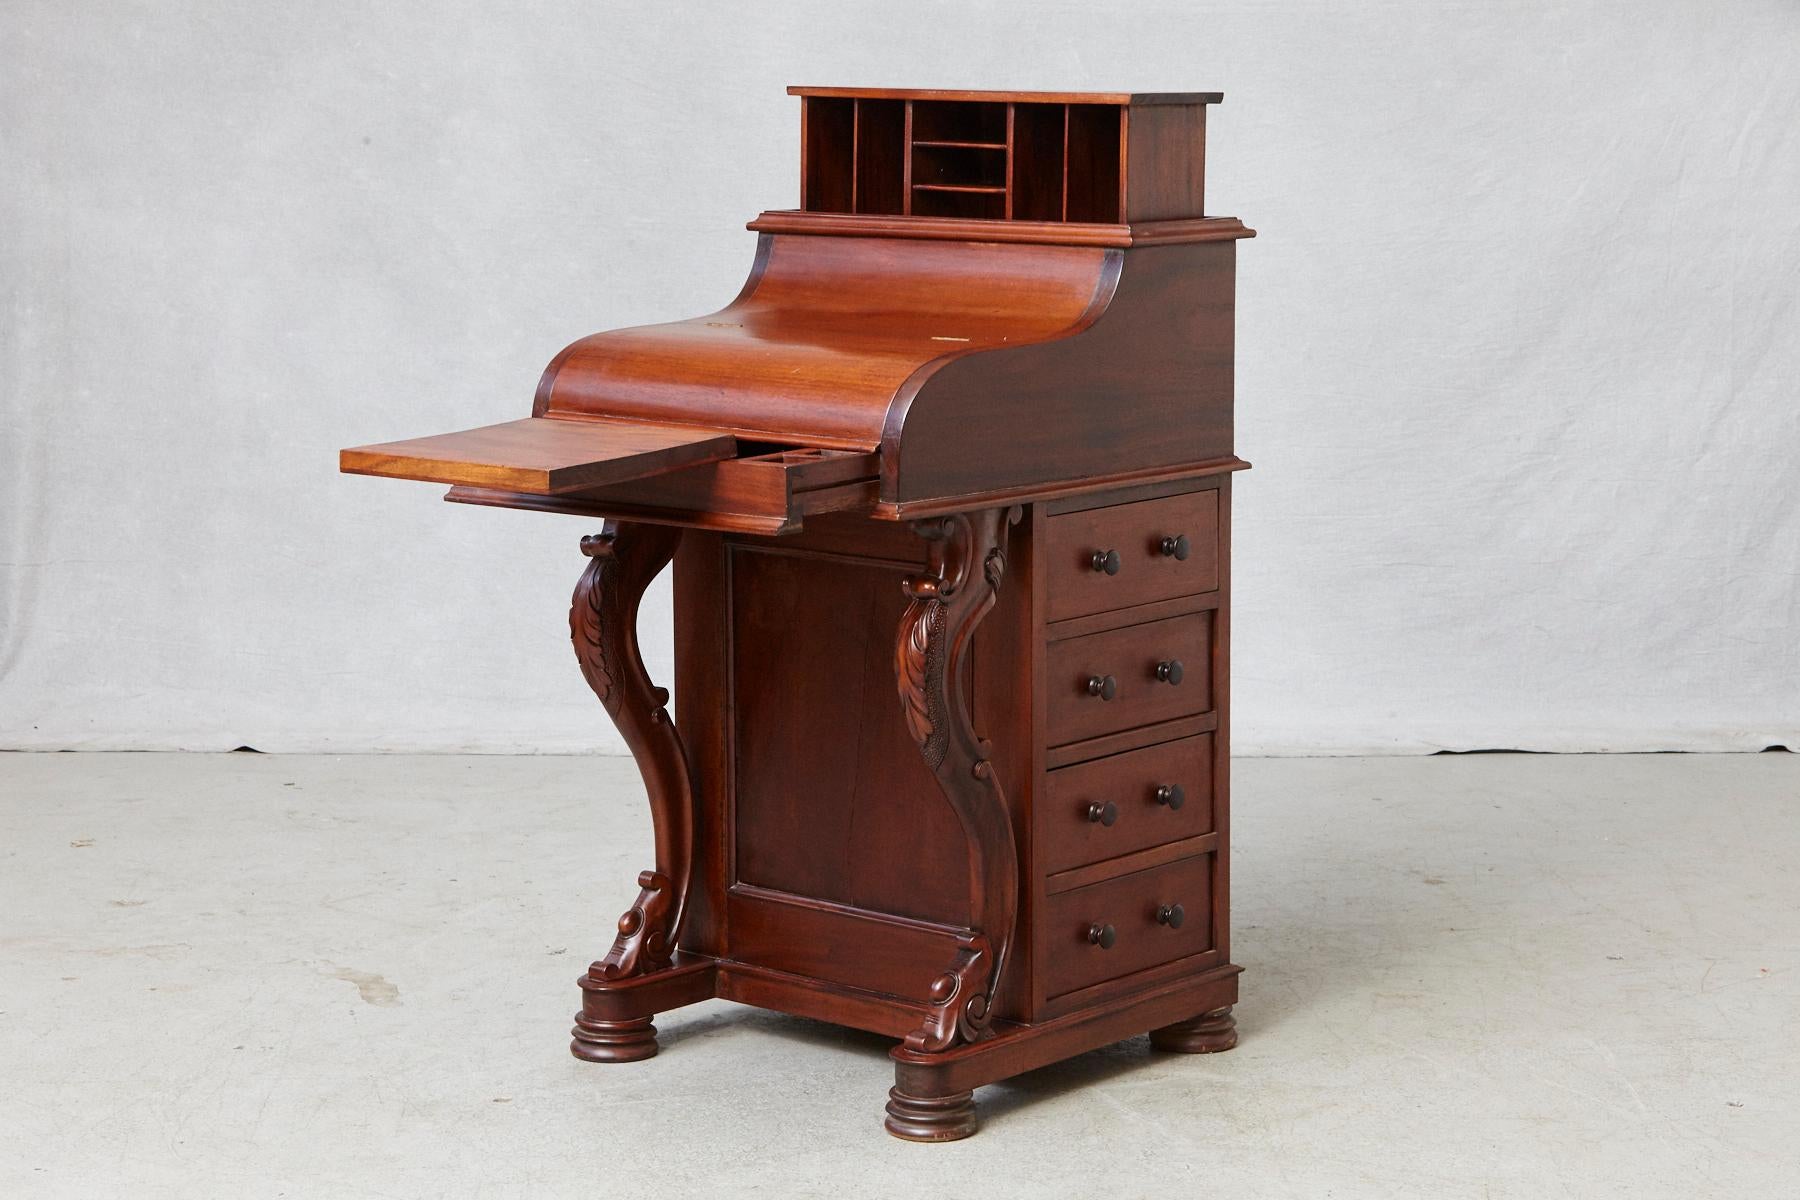 20th century walnut Davenport desk with a piano top, a flip front, a spring loaded letter compartment released with a hidden latch in a lower drawer, a plentitude of drawers, pen trays and pigeonholes for storage. 
Four full width drawers on one